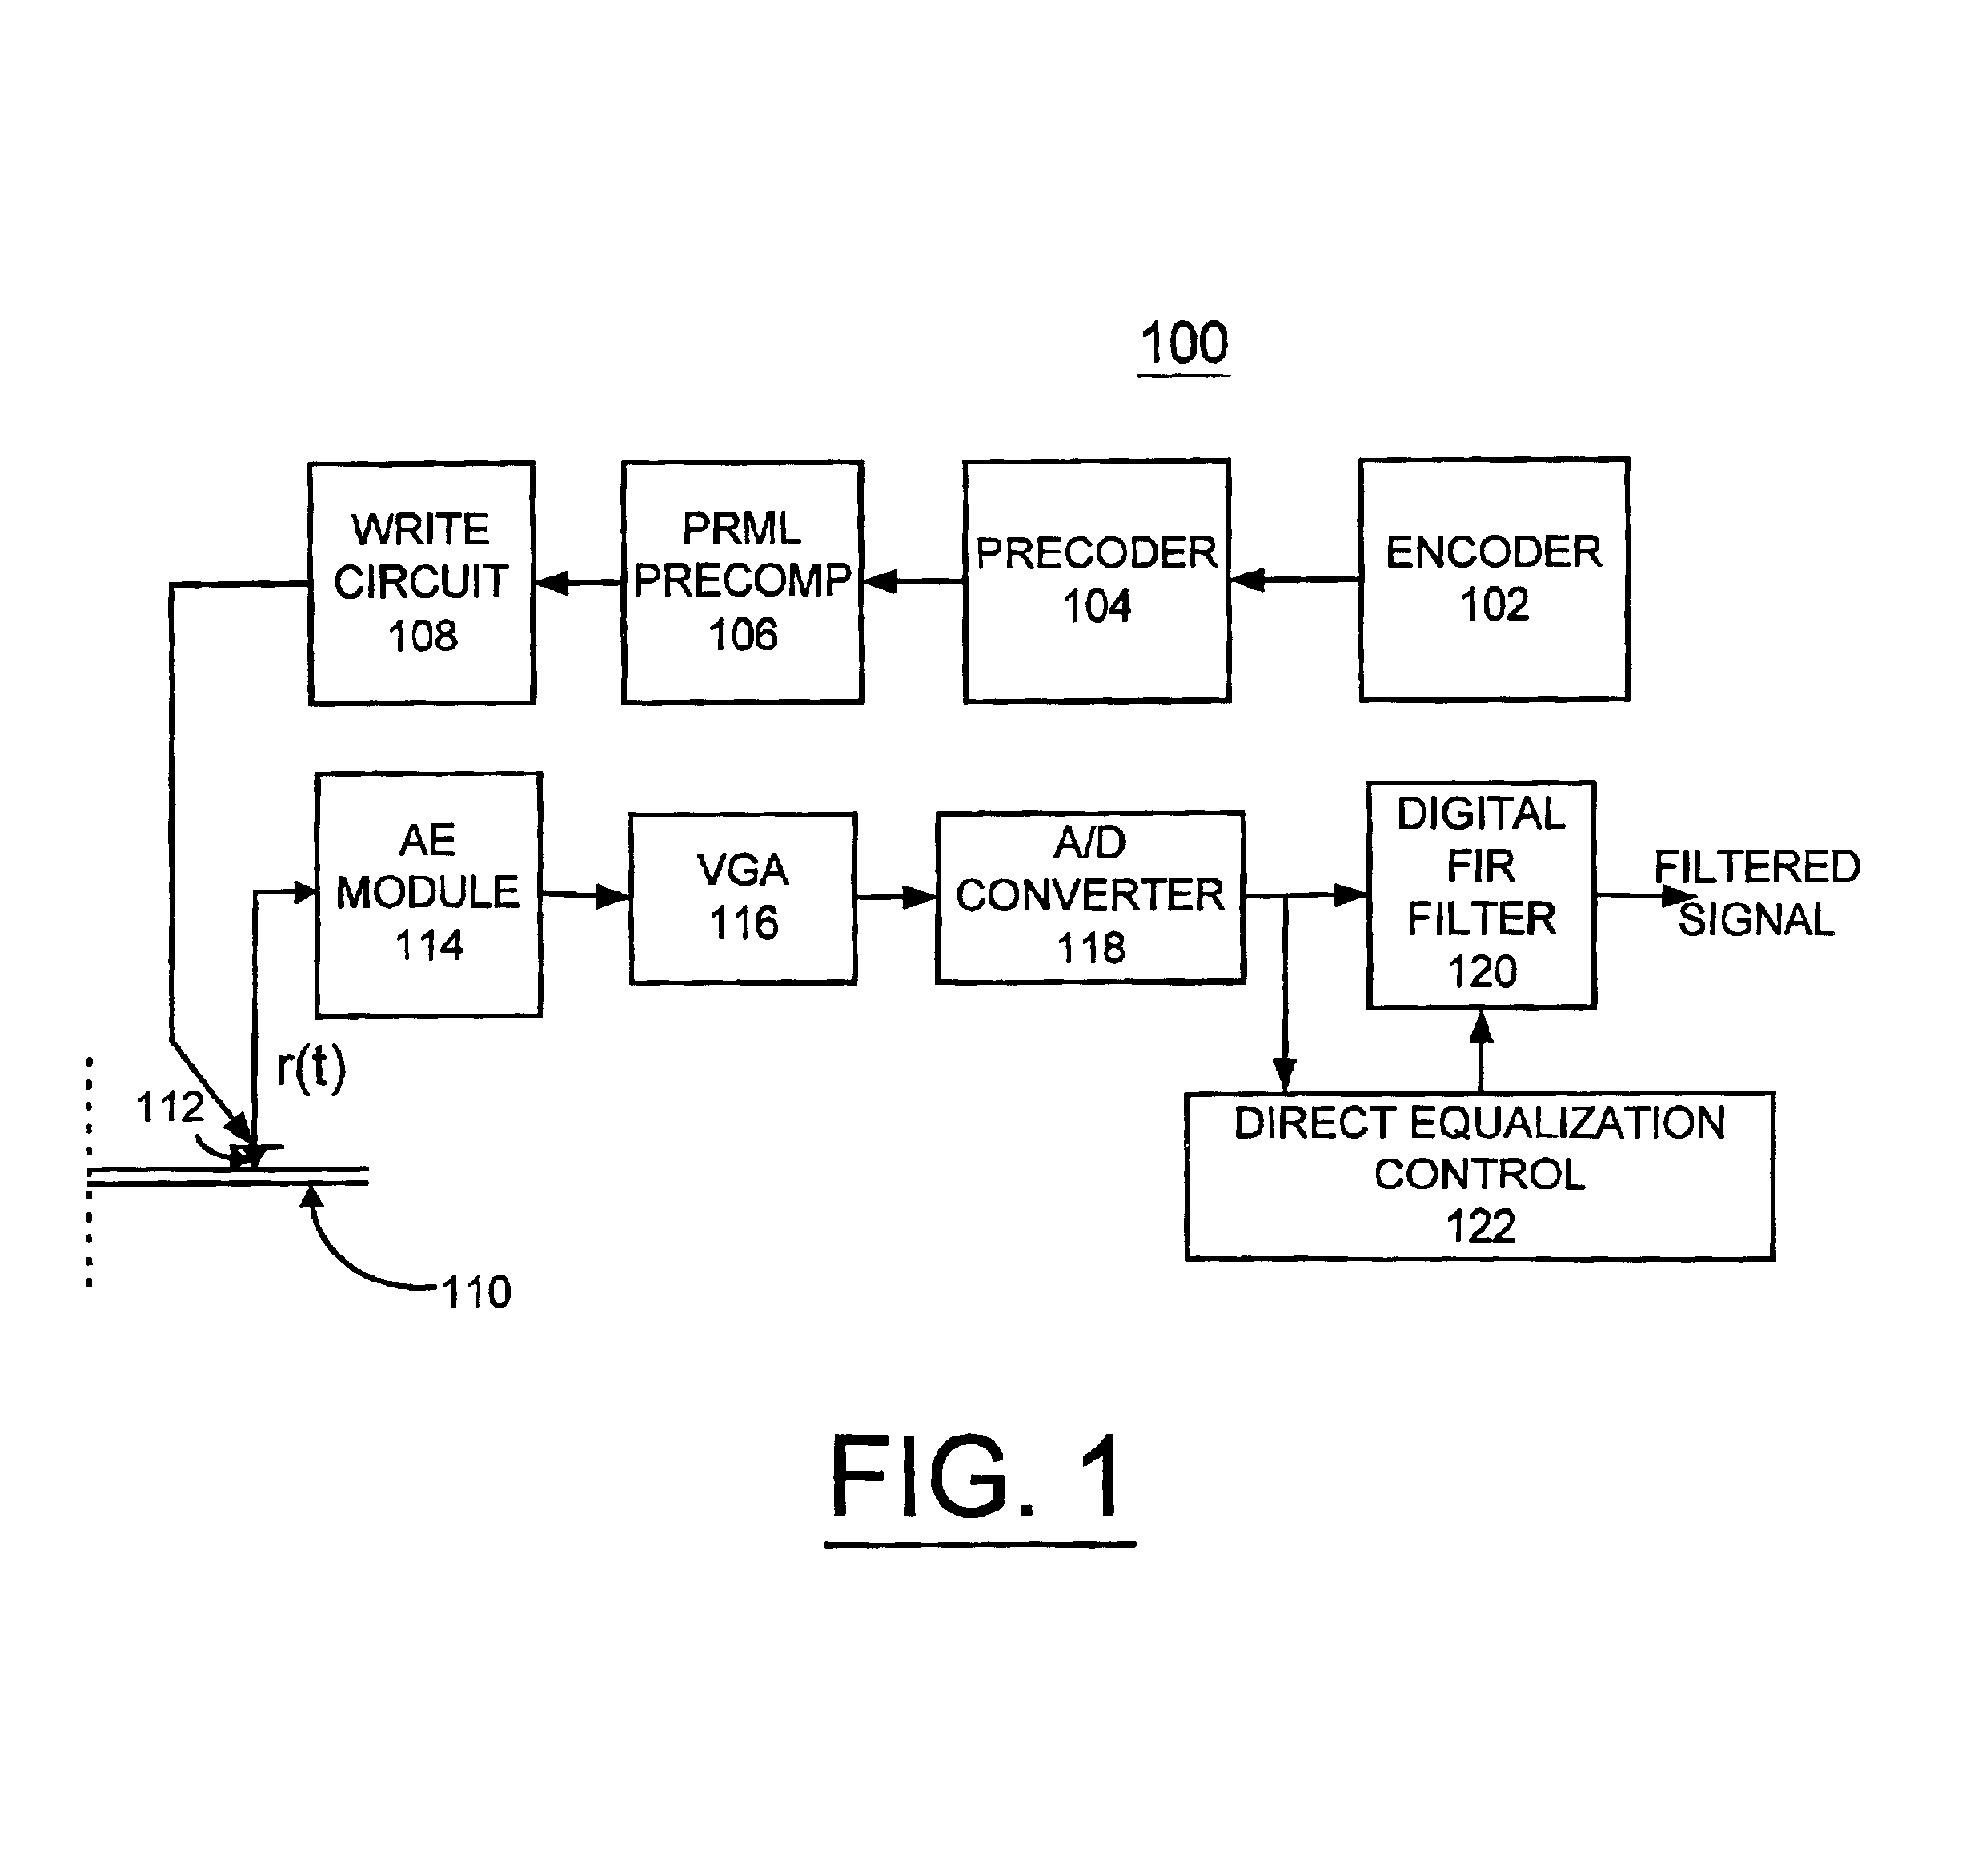 Method and apparatus for channel equalization with a digital FIR filter using a pseudo random sequence